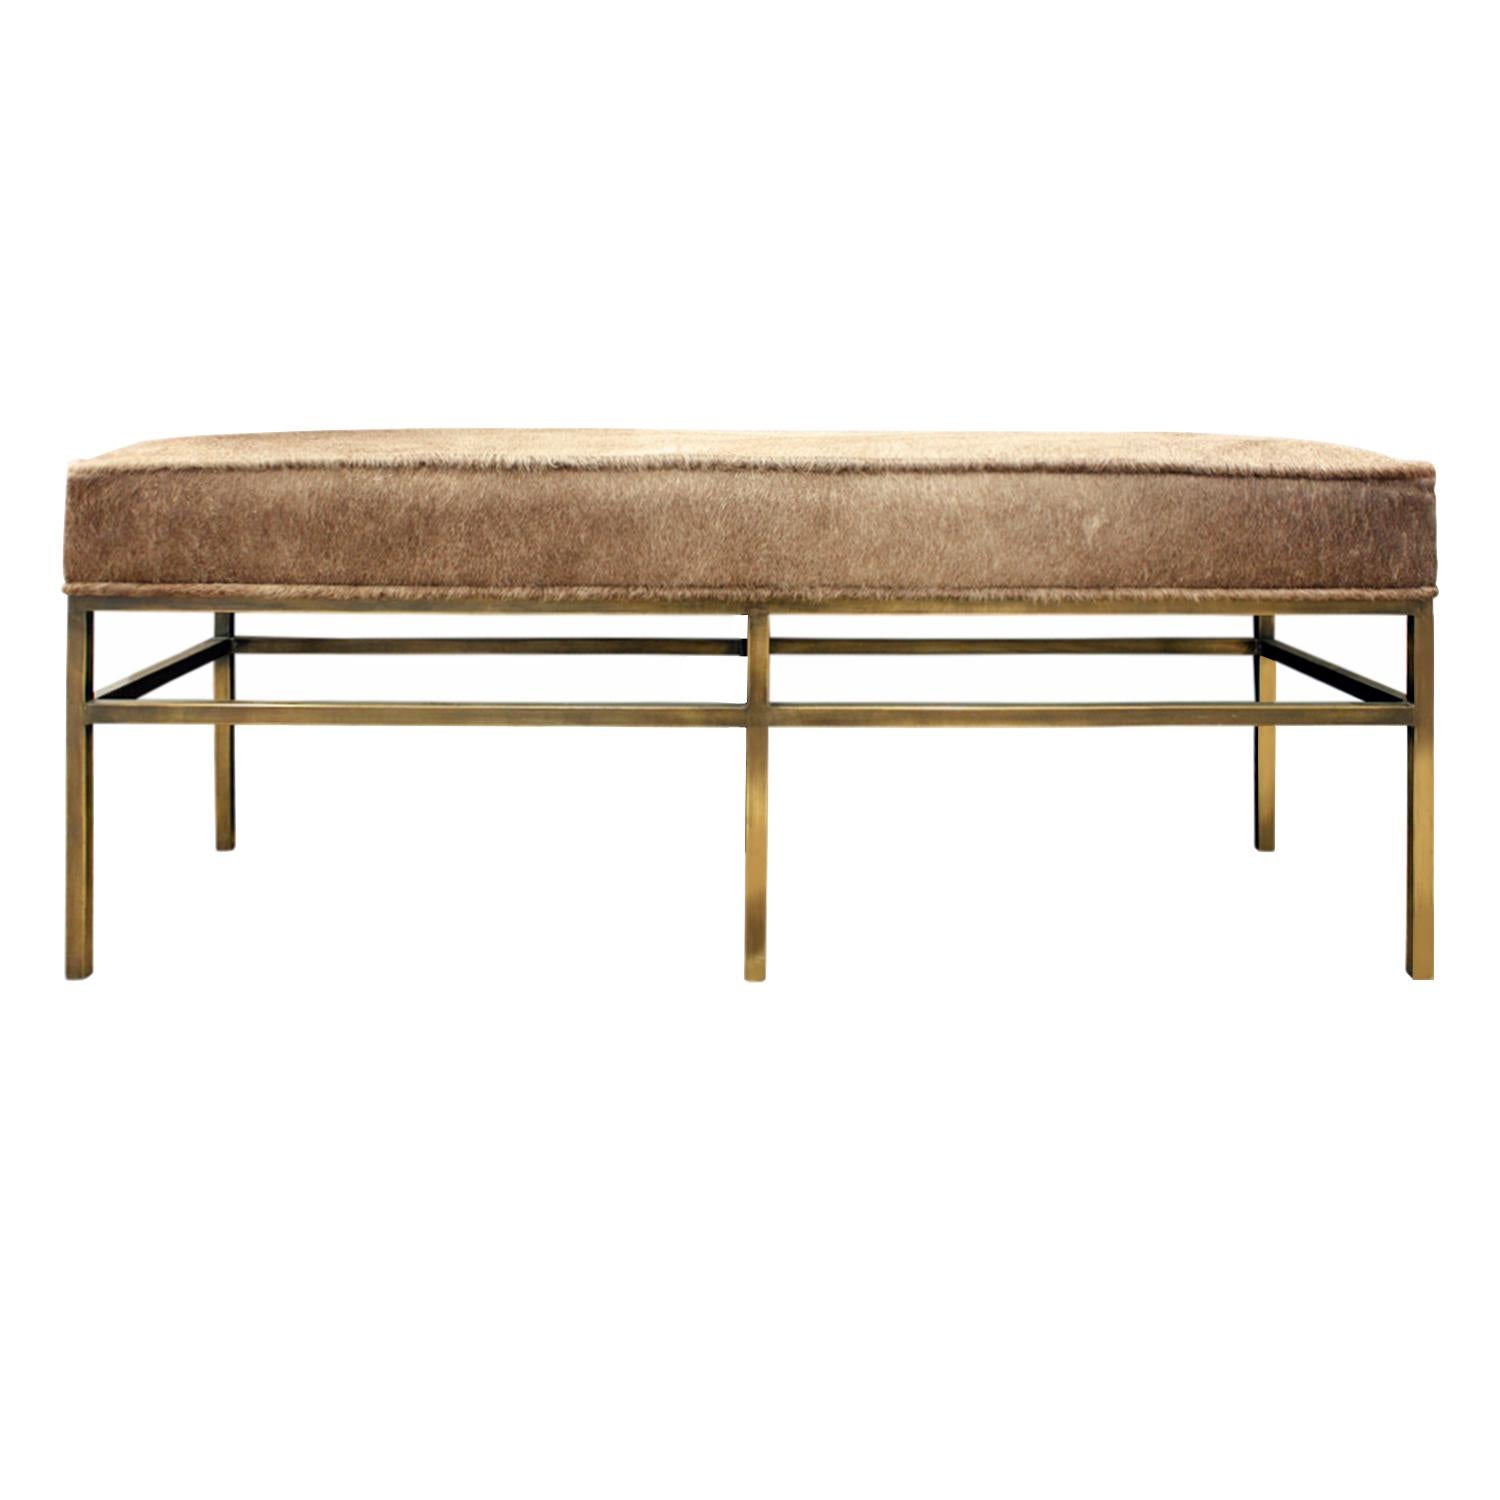 Architectural bench with base in bronze and top upholstered in pony skin, American, 1970s.